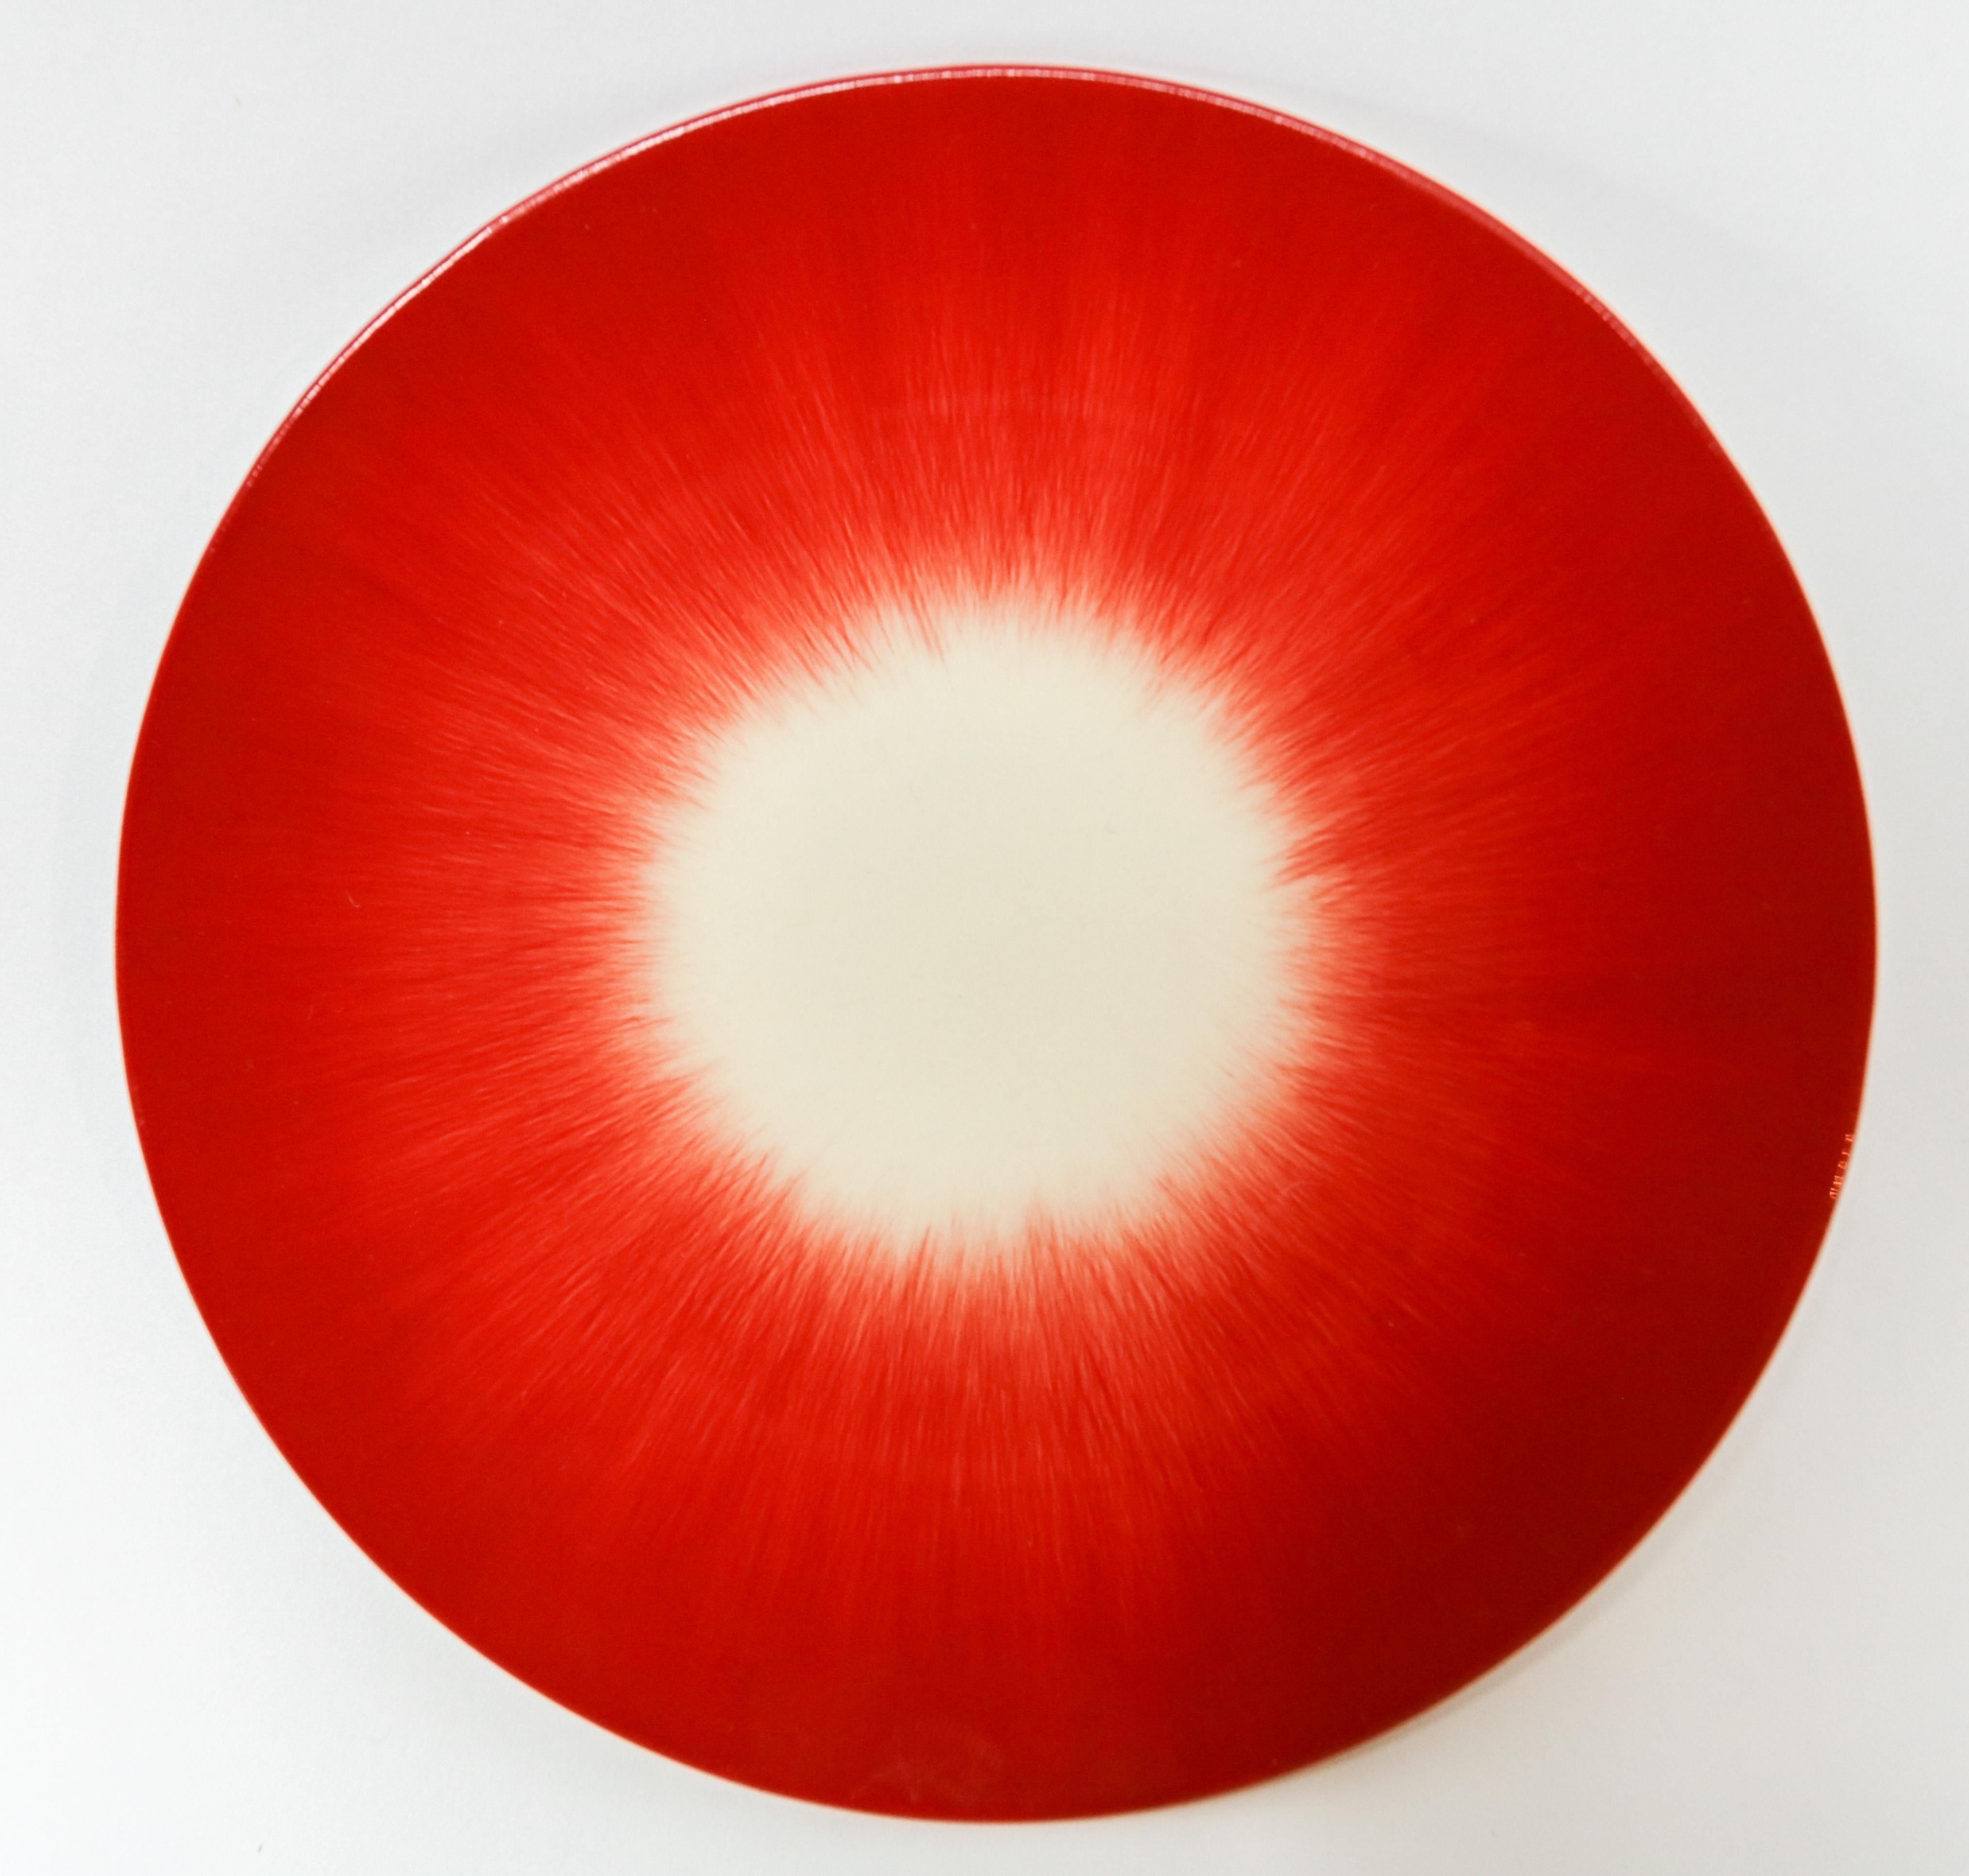 Ann Demeulemeester for Serax Dé Dessert Plate in Off White / Red 1